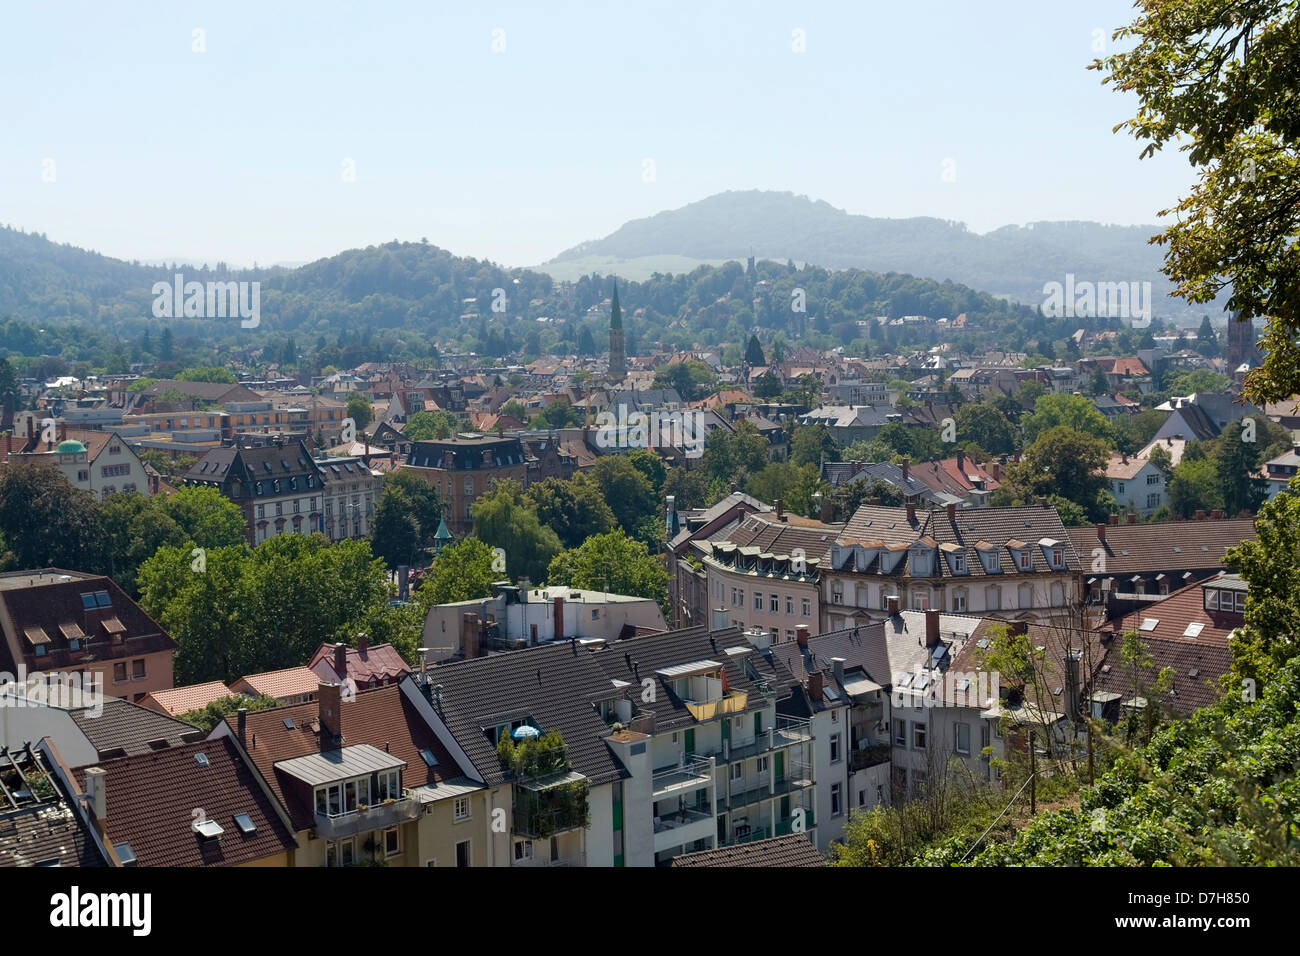 aerial view of Freiburg im Breisgau, a city in Southern Germany.Sunny illuminated scenery at summer time seen from a hill named Stock Photo